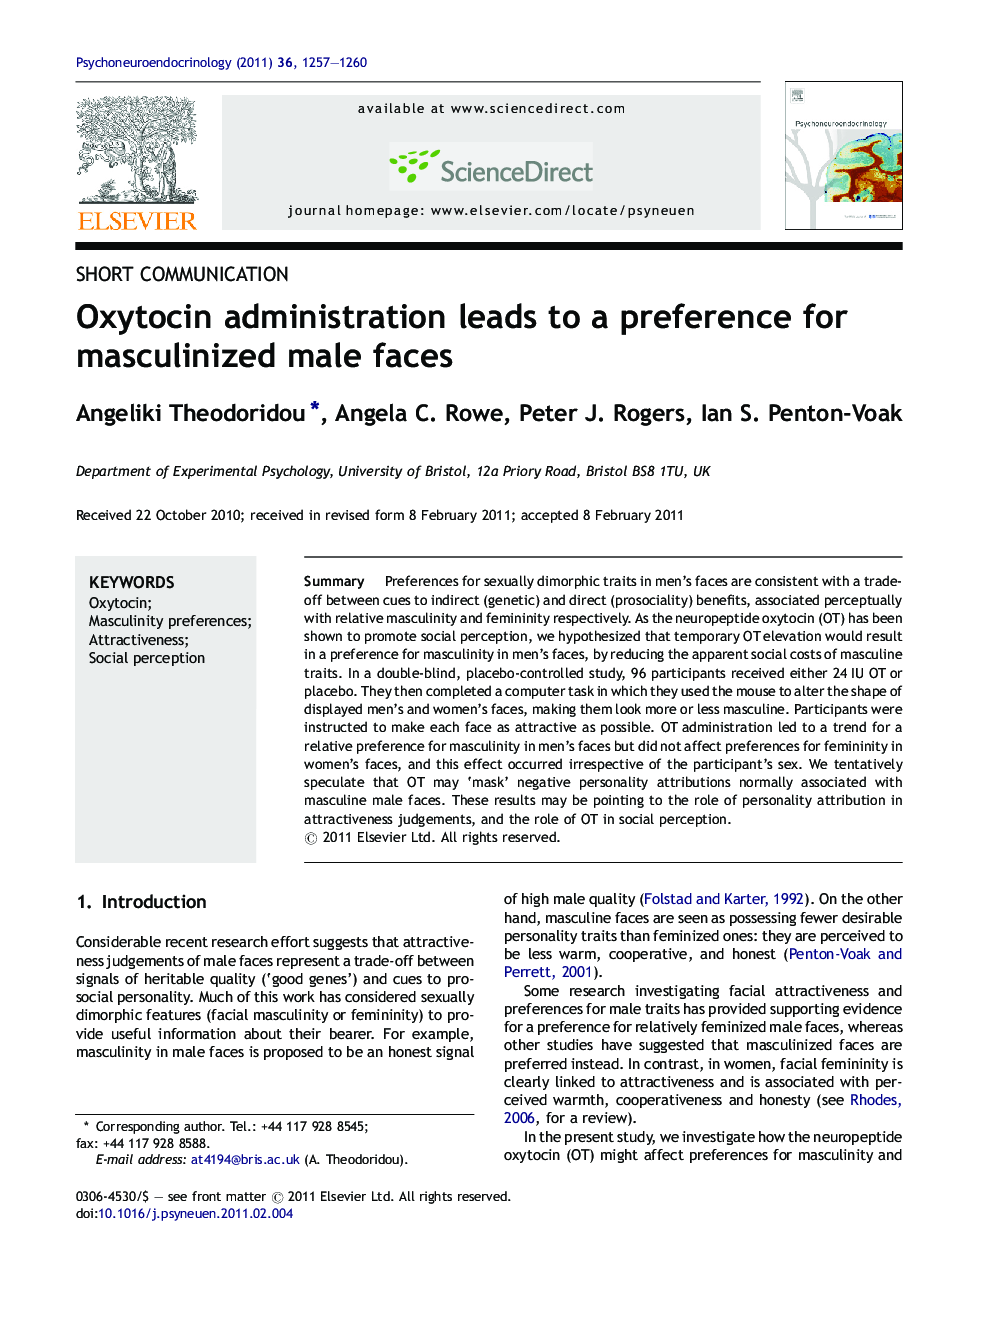 Oxytocin administration leads to a preference for masculinized male faces